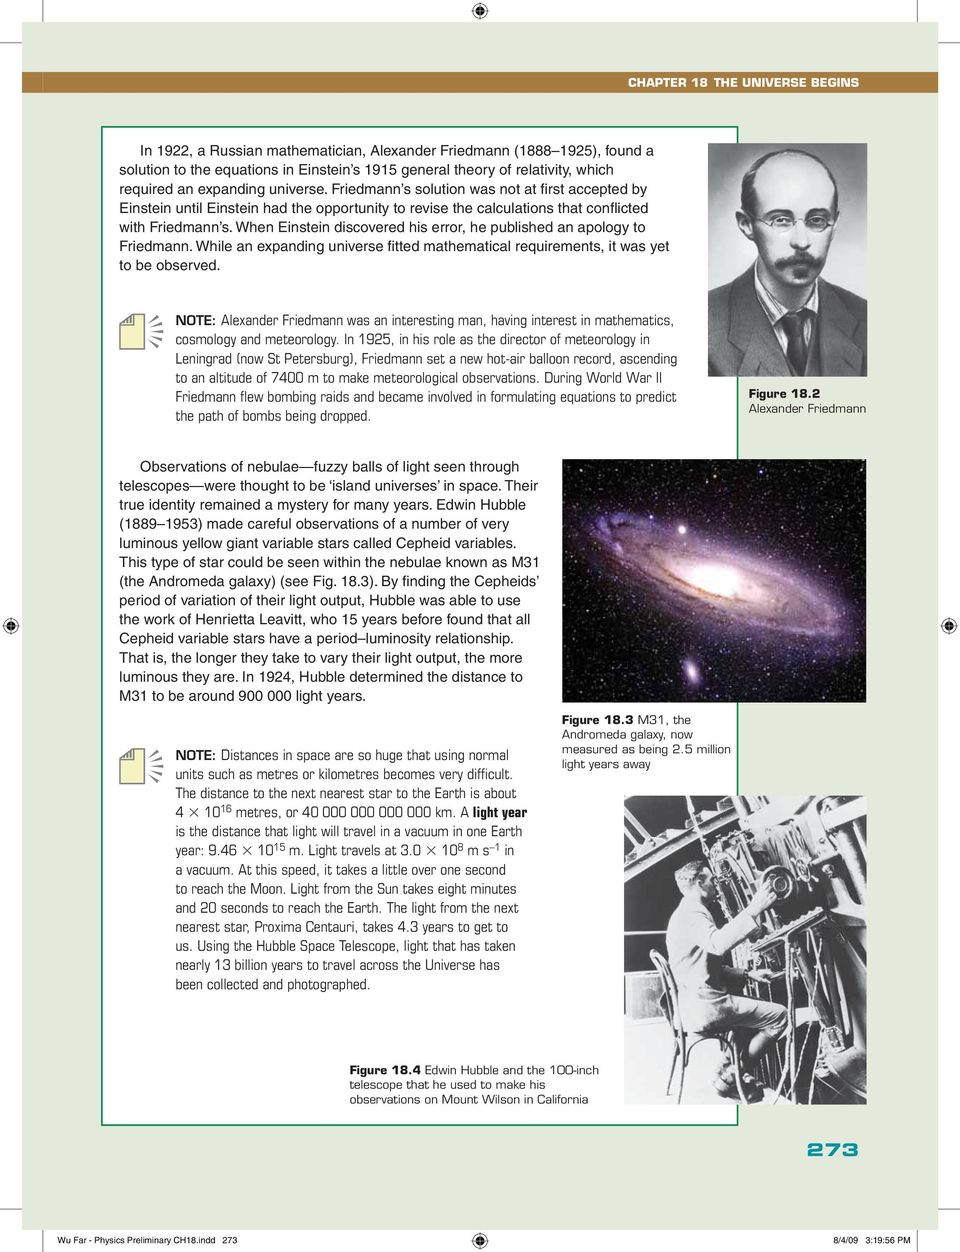 When Einstein discovered his error, he published an apology to Friedmann. While an expanding universe fi tted mathematical requirements, it was yet to be observed.